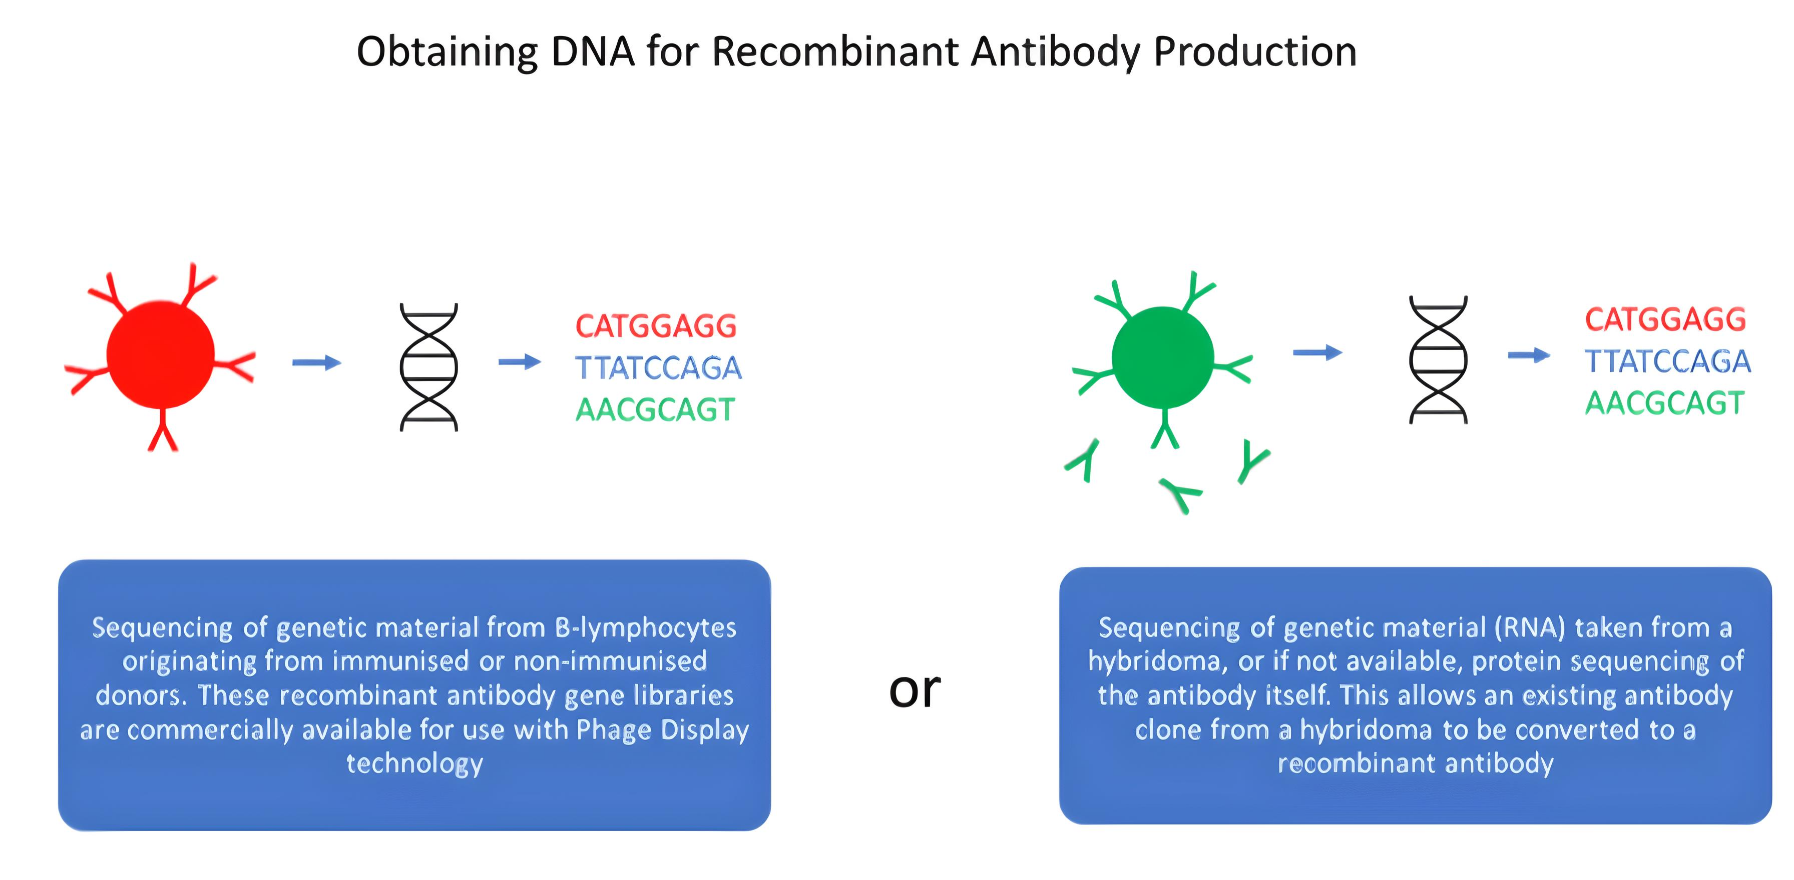 Methodology of obtaining DNA for production of recombinant antibodies